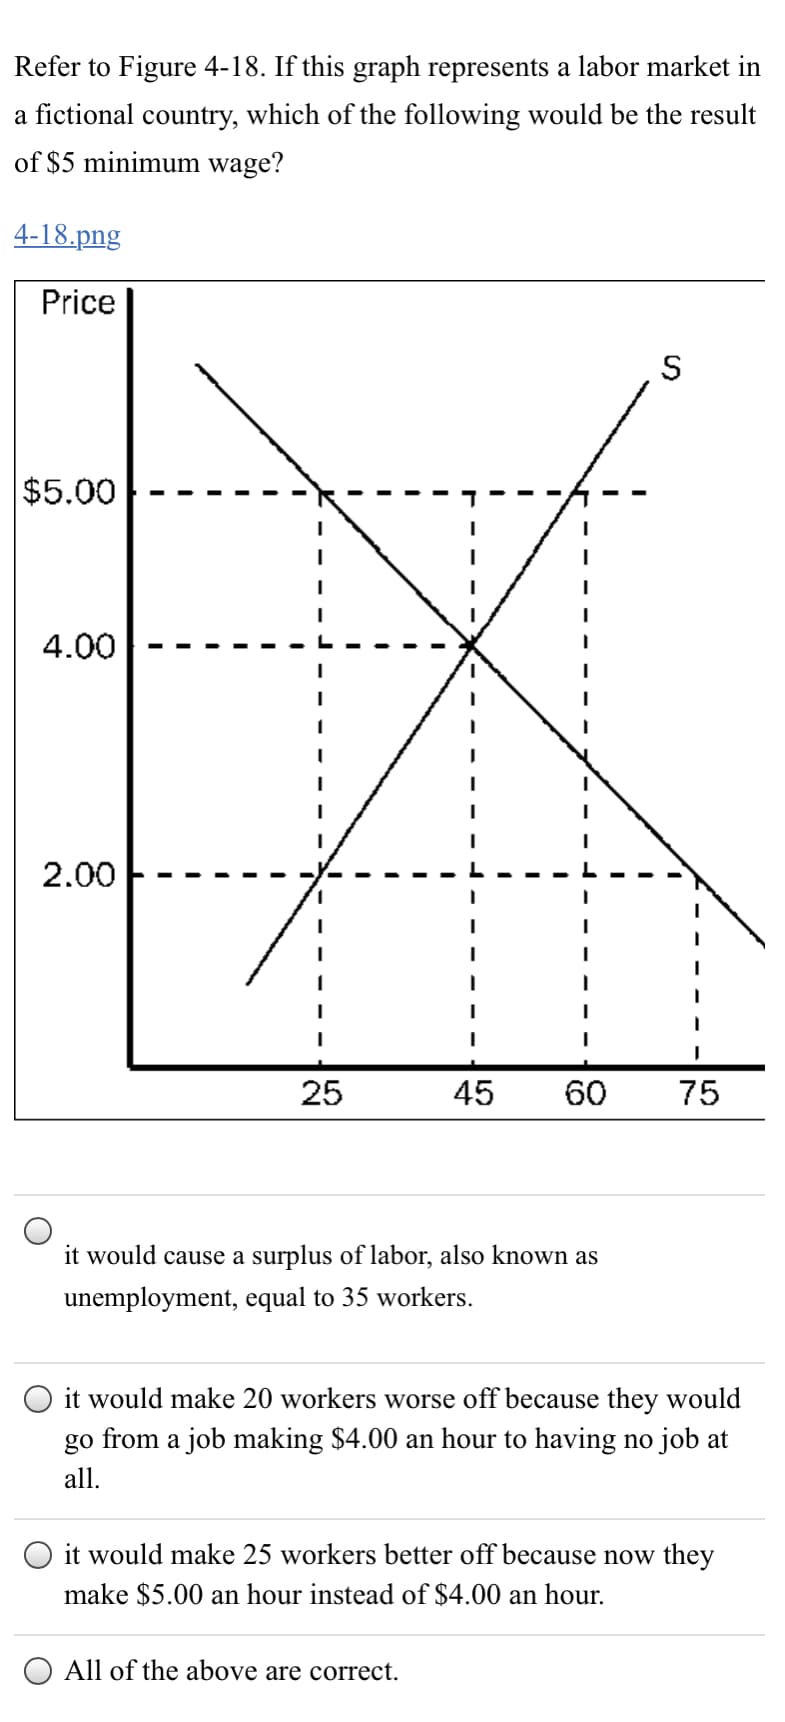 Refer to Figure 4-18. If this graph represents a labor market in
a fictional country, which of the following would be the result
of $5 minimum wage?
4-18.png
Price
$5.00
4.00
2.00
25
45
60
75
it would cause a surplus of labor, also known as
unemployment, equal to 35 workers.
O it would make 20 workers worse off because they would
go from a job making $4.00 an hour to having no job at
all.
O it would make 25 workers better off because now they
make $5.00 an hour instead of $4.00 an hour.
O All of the above are correct.
